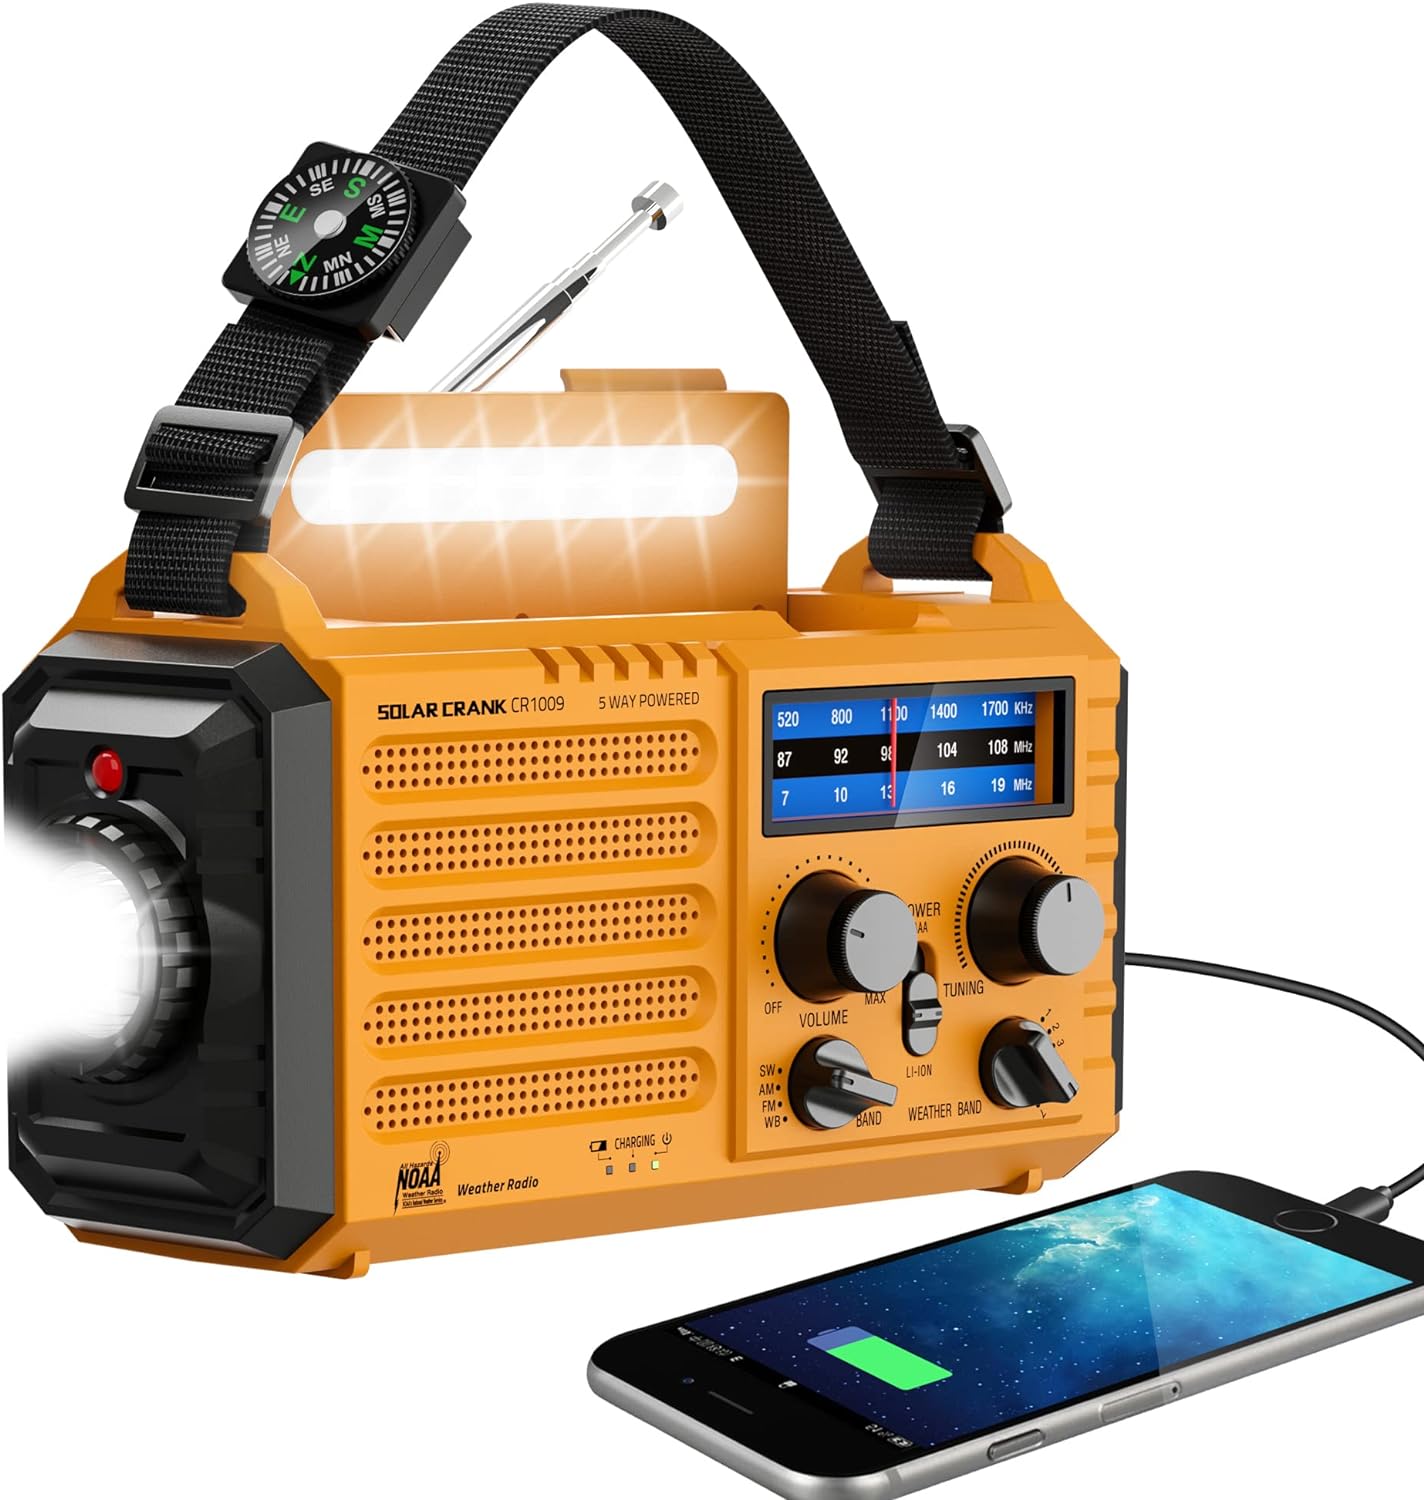 Emergency Radio with NOAA Weather Alert, Portable Solar Hand Crank AM/FM Radio for Survival,Rechargeable Battery Powered Radio